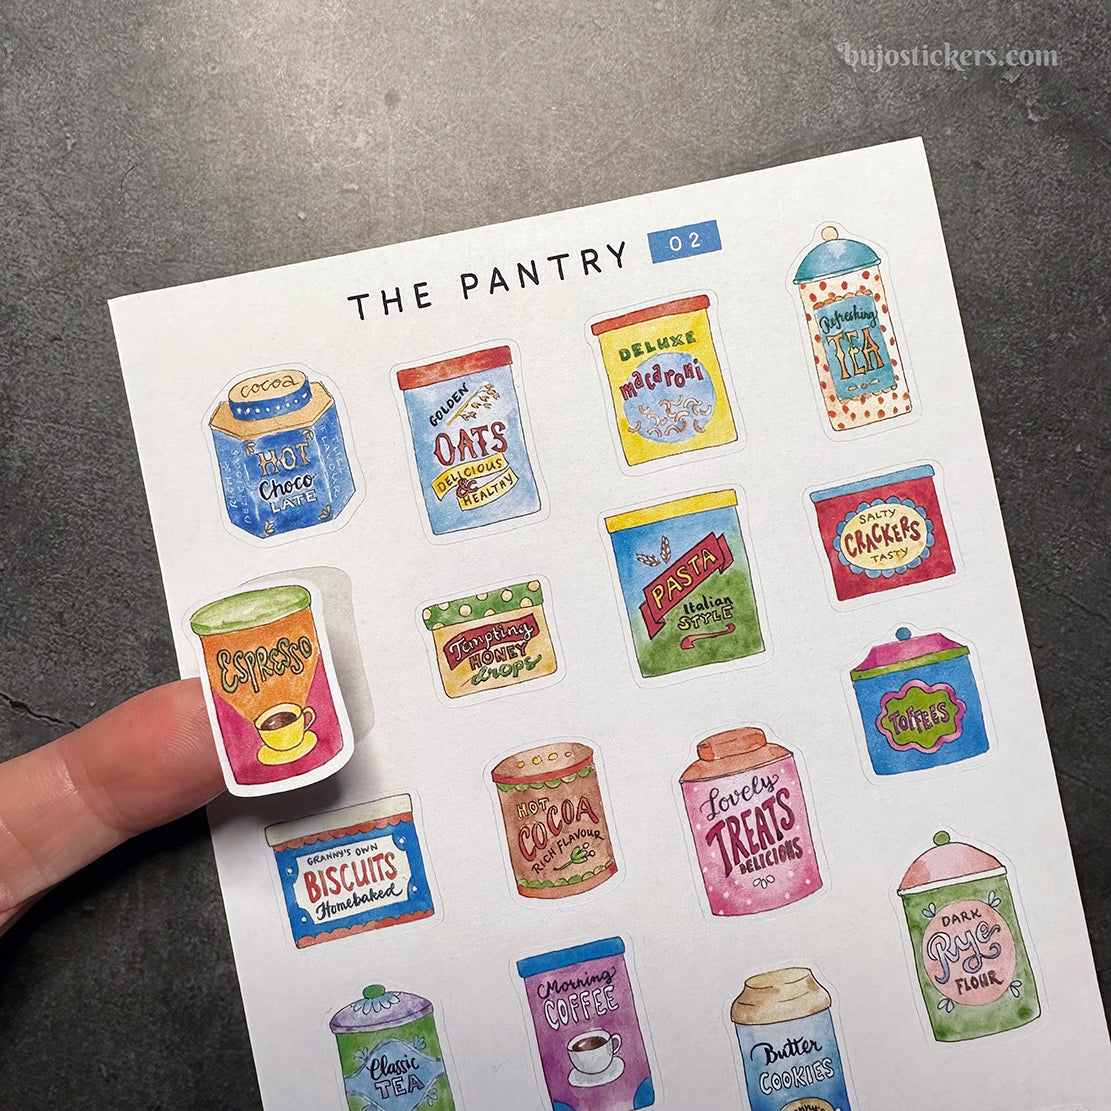 The Pantry 02